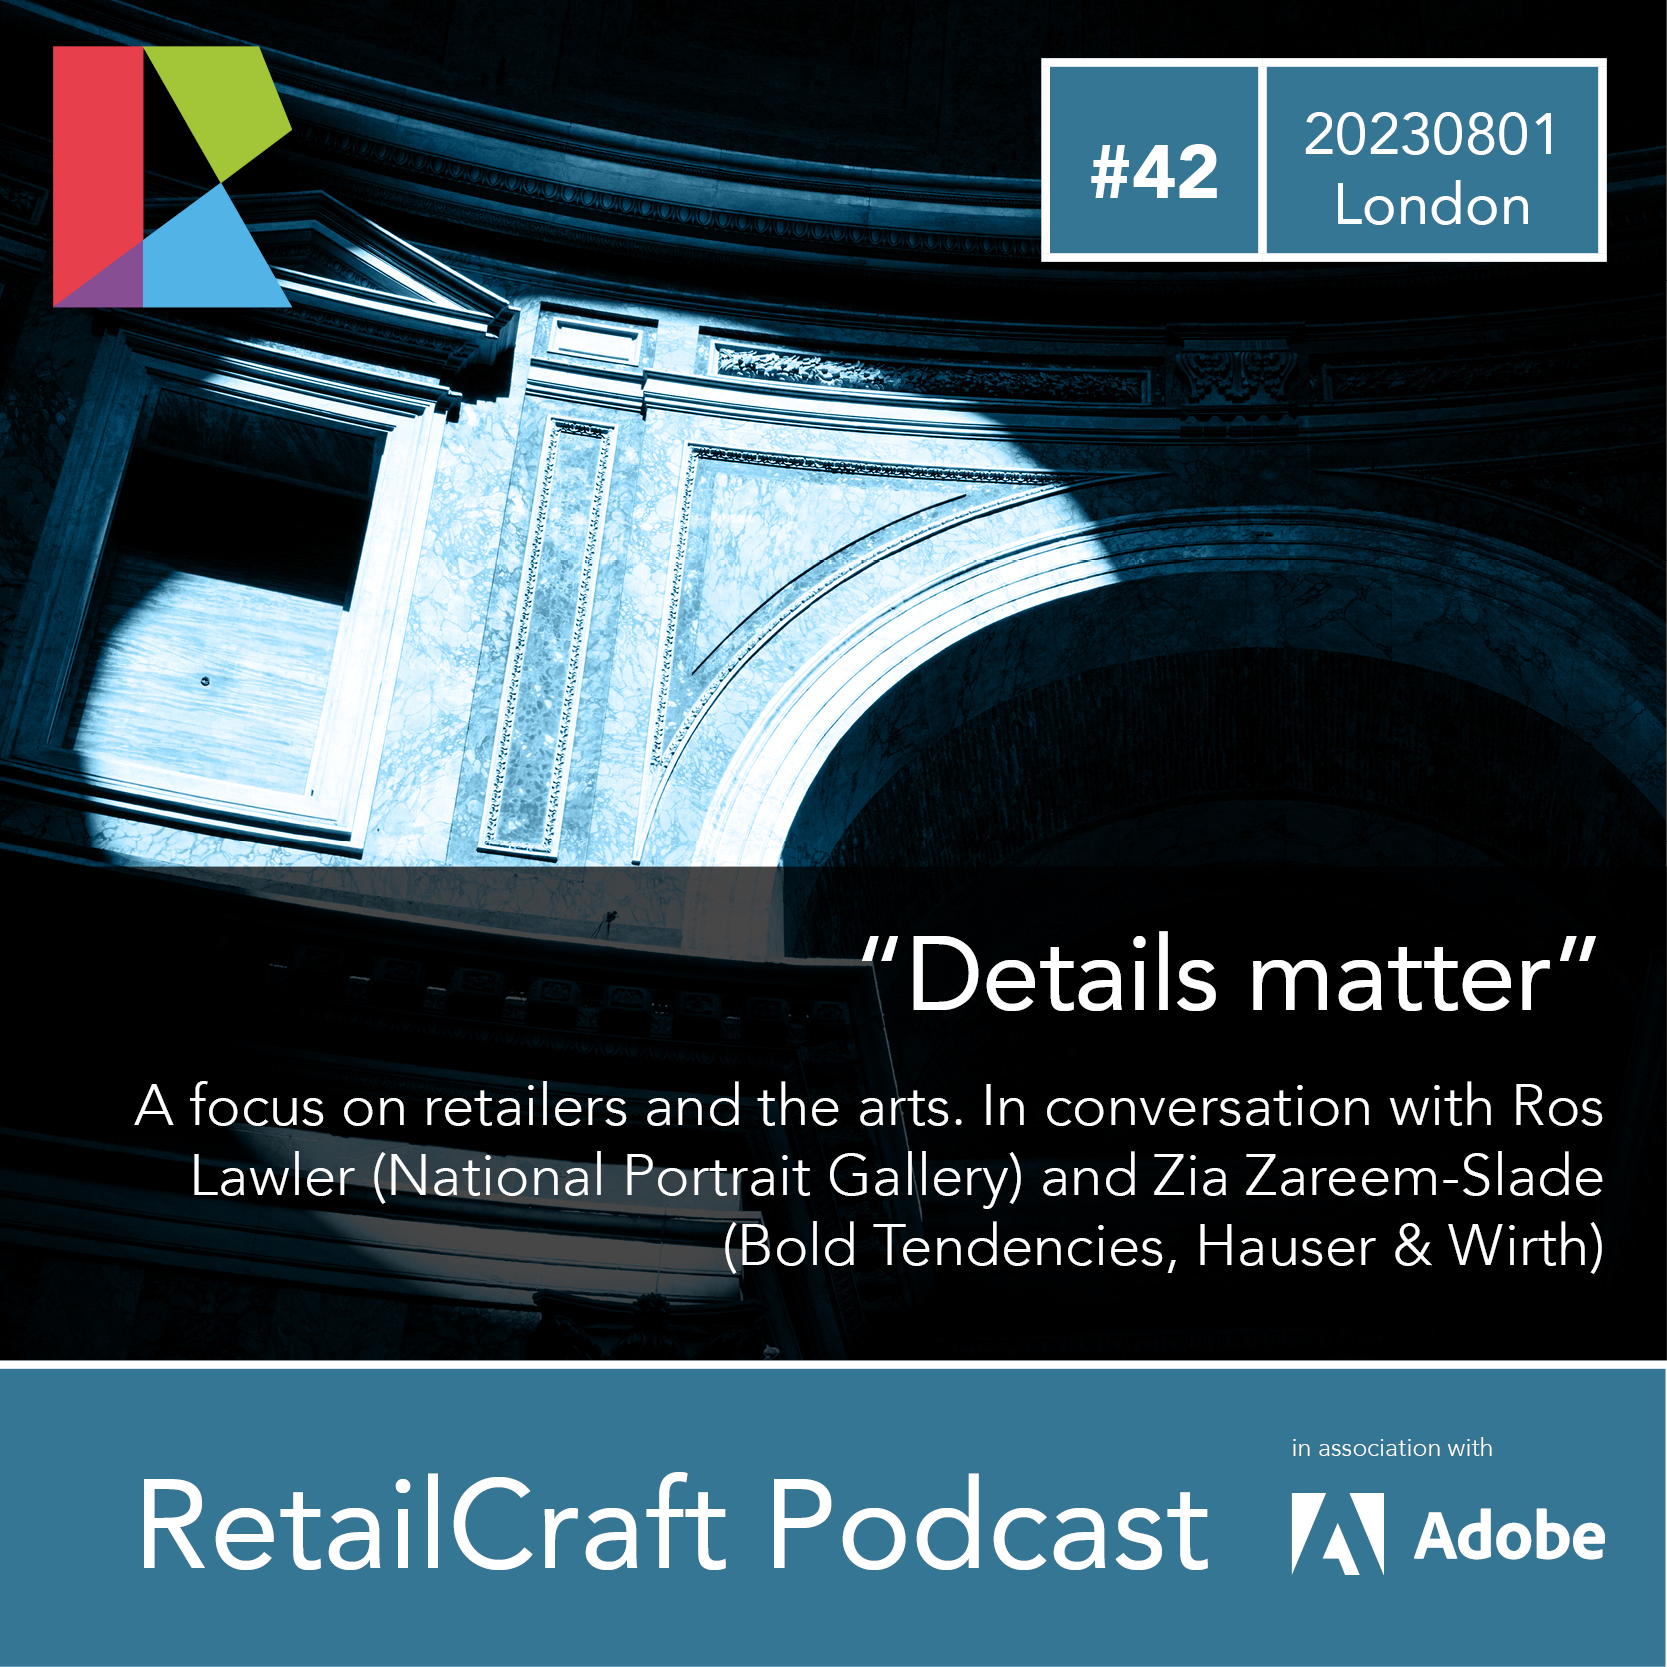 RetailCraft Podcast #42 – ”Details Matter” – retail and the arts – Ros Lawler and Zia Zareem-Slade